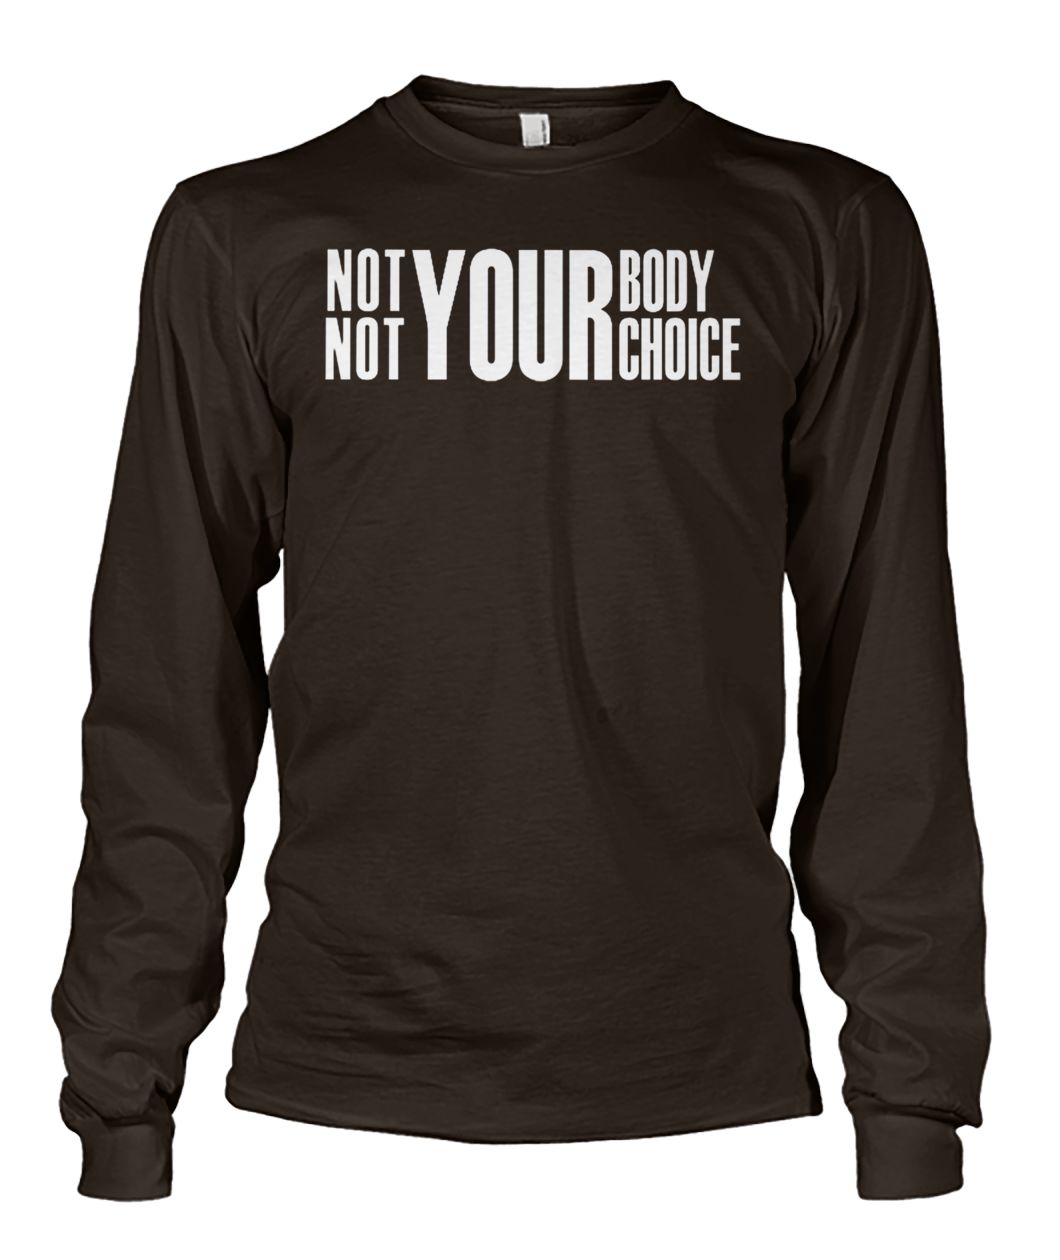 Not your body not your choice unisex long sleeve